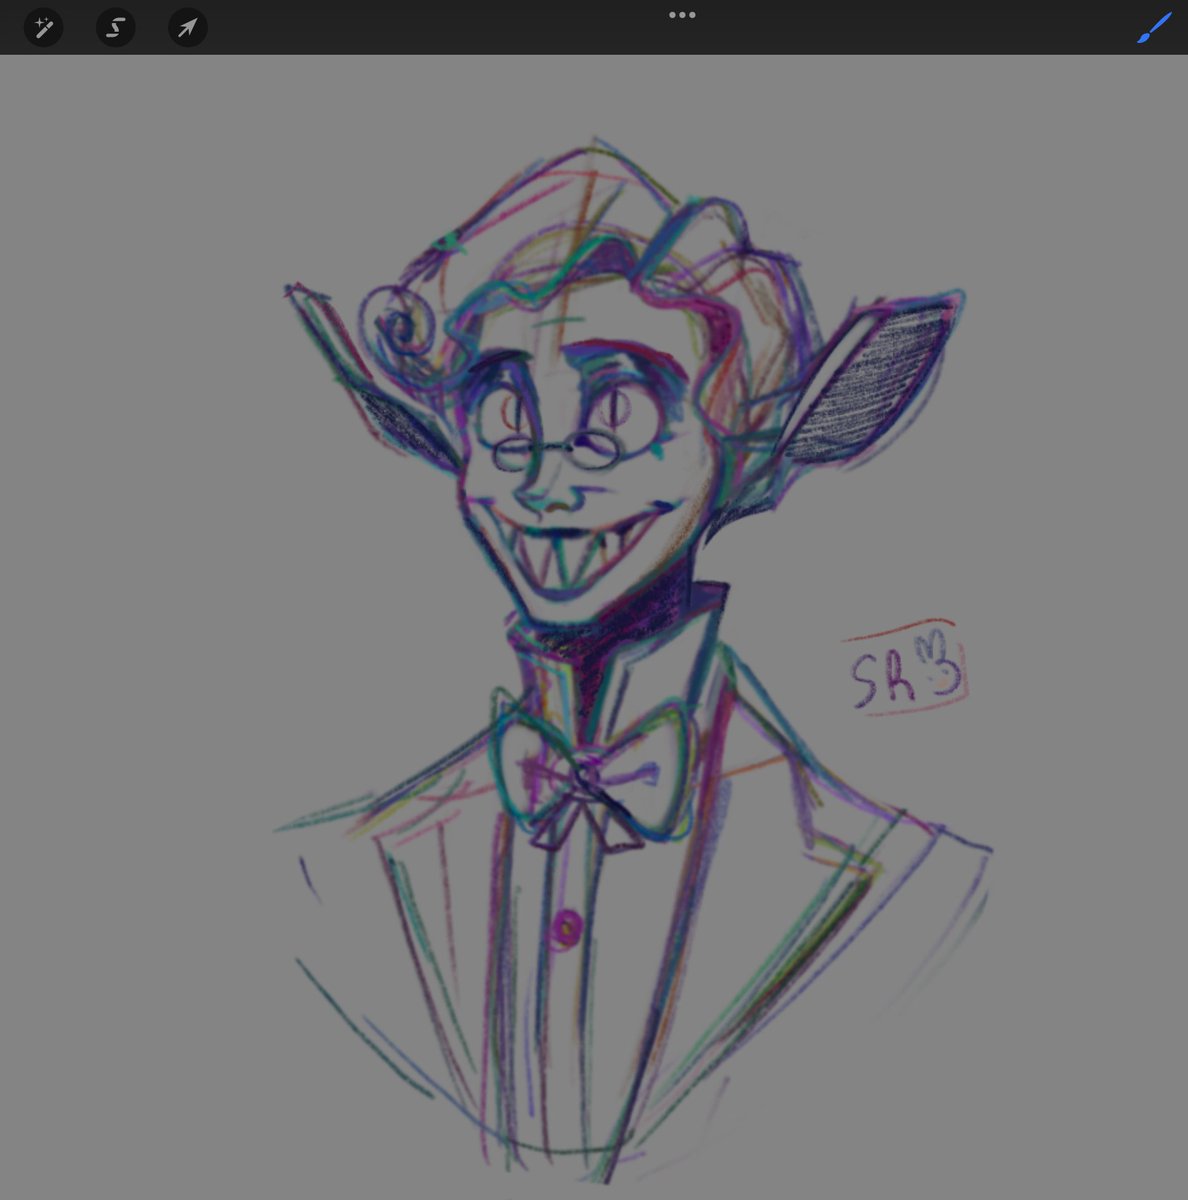 Old Alastor redesign, dunno if I’ll finish it or not #Alastor #hazbinhotel #alastorfanart #HazbinHotelAlastor